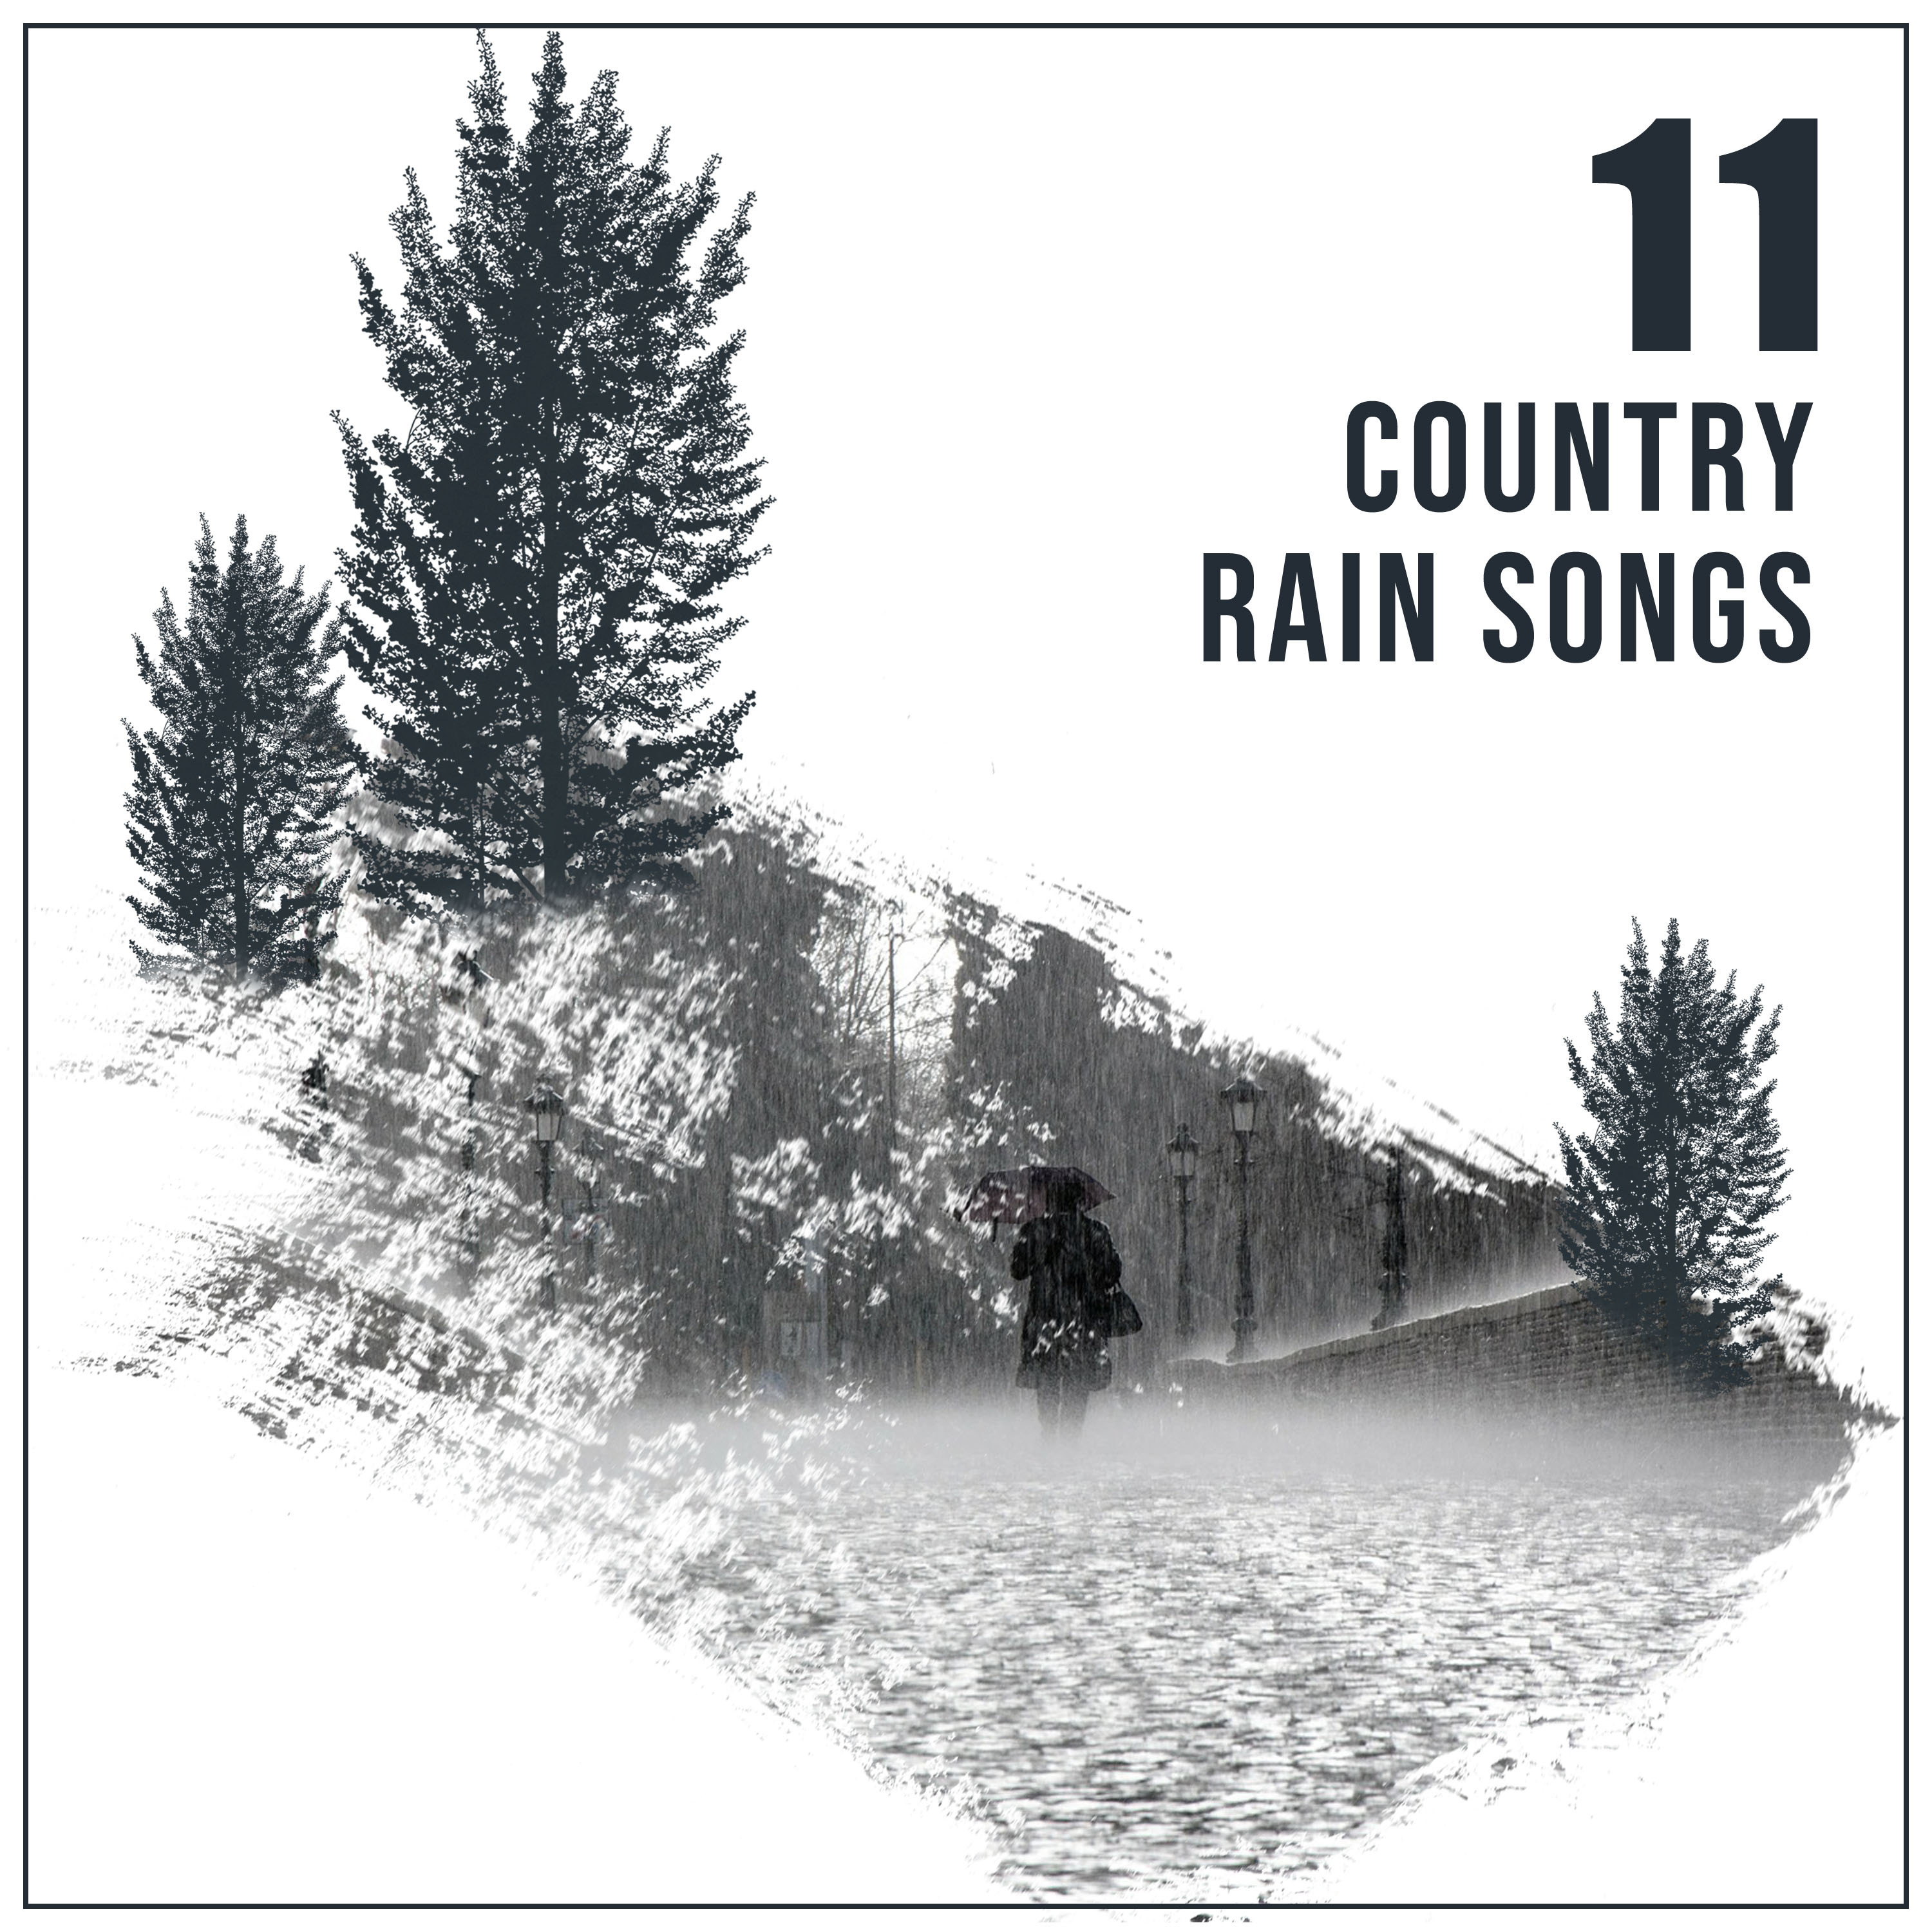 11 Country Rain Songs to Calm the Mind & Relax